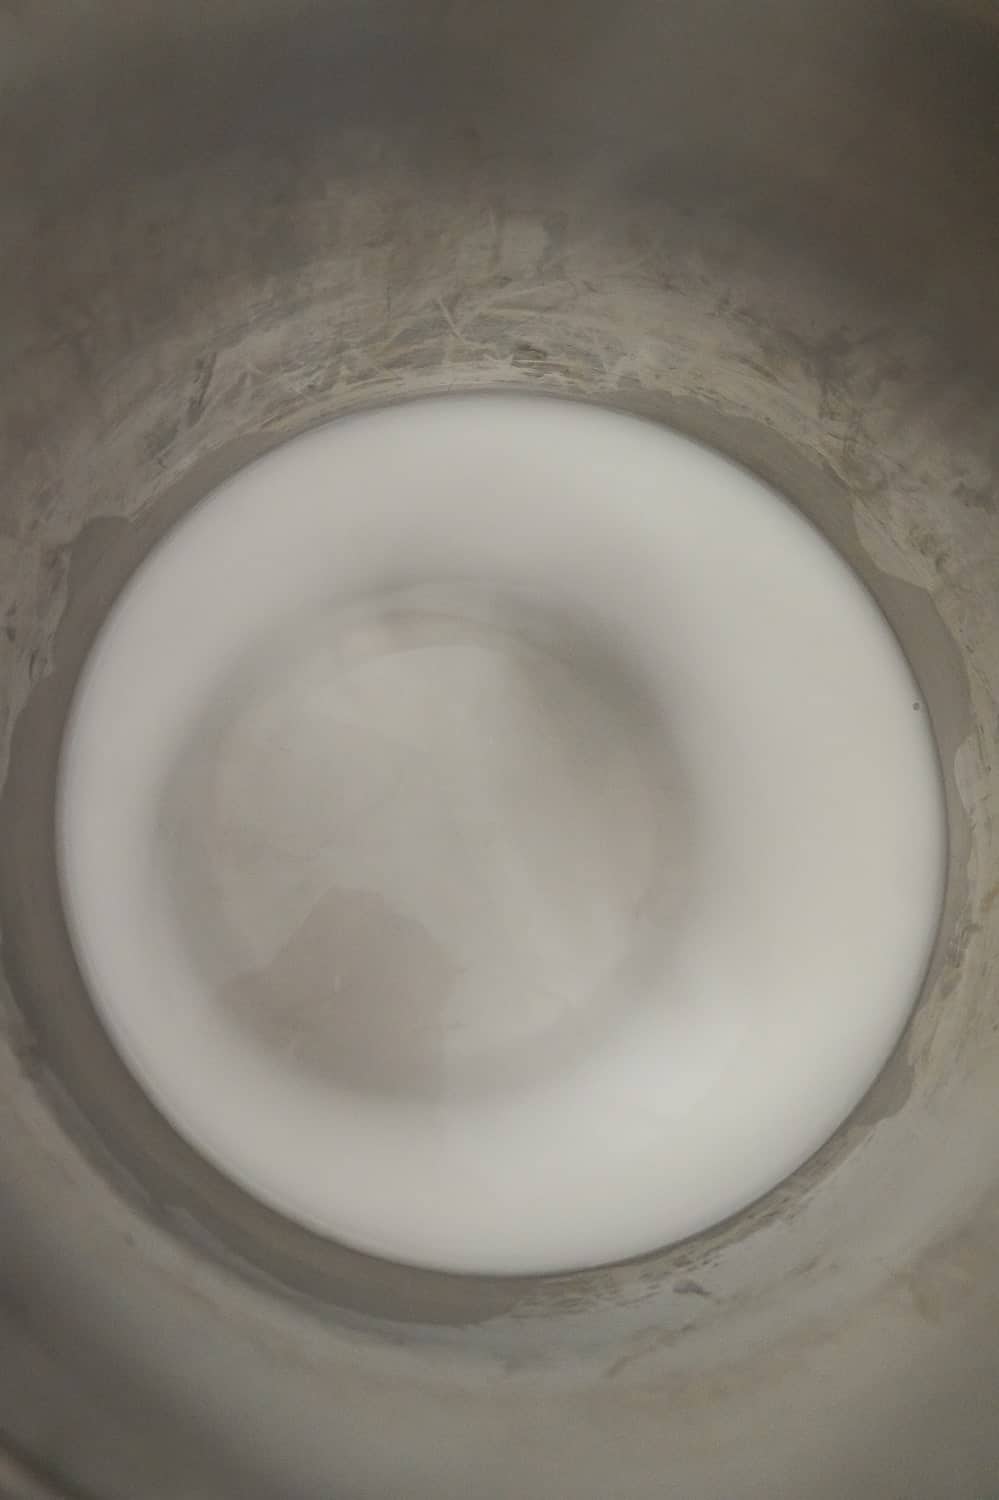 cornstarch and water mixture in an Instant Pot